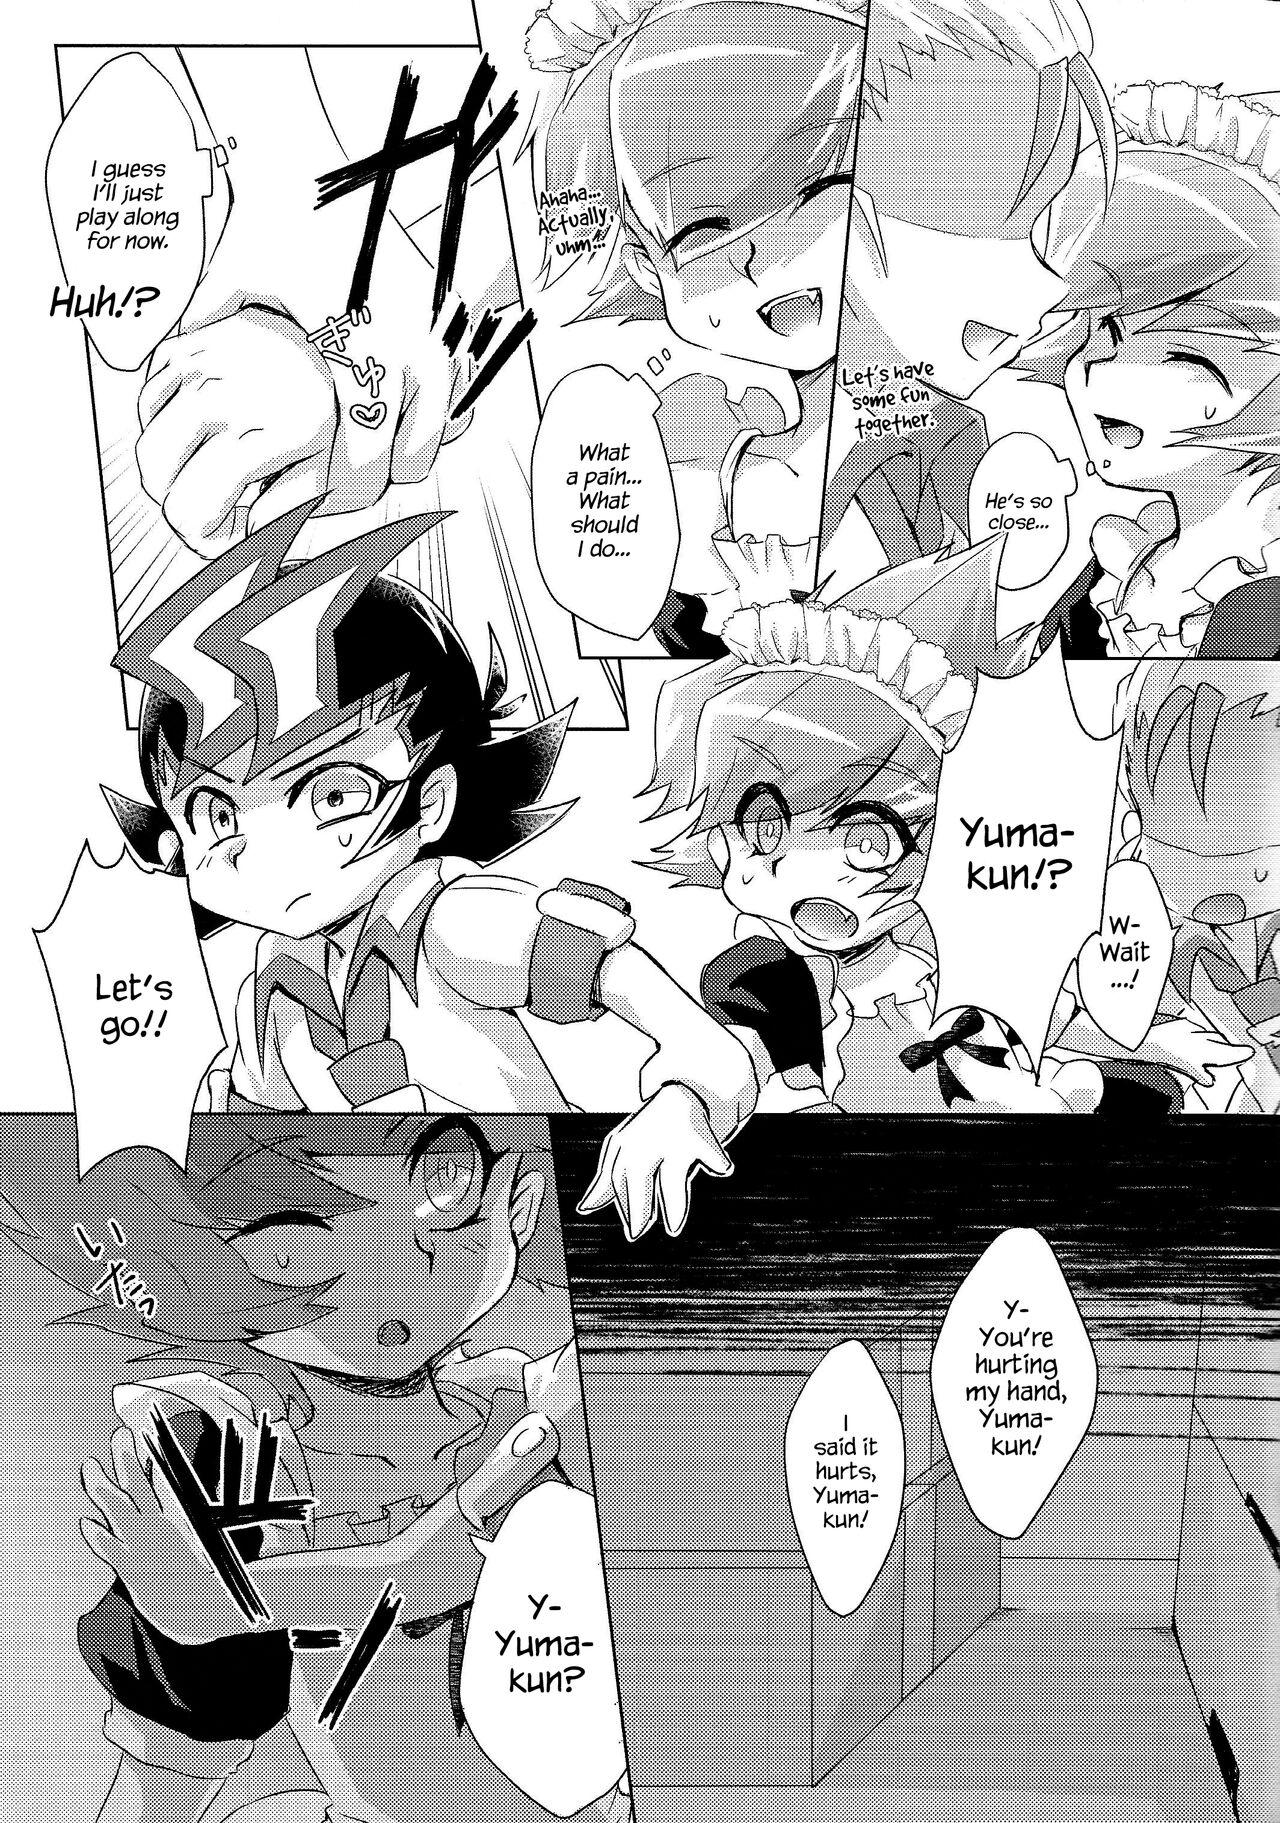 Mistress Stand by me - Yu gi oh zexal Slave - Page 6